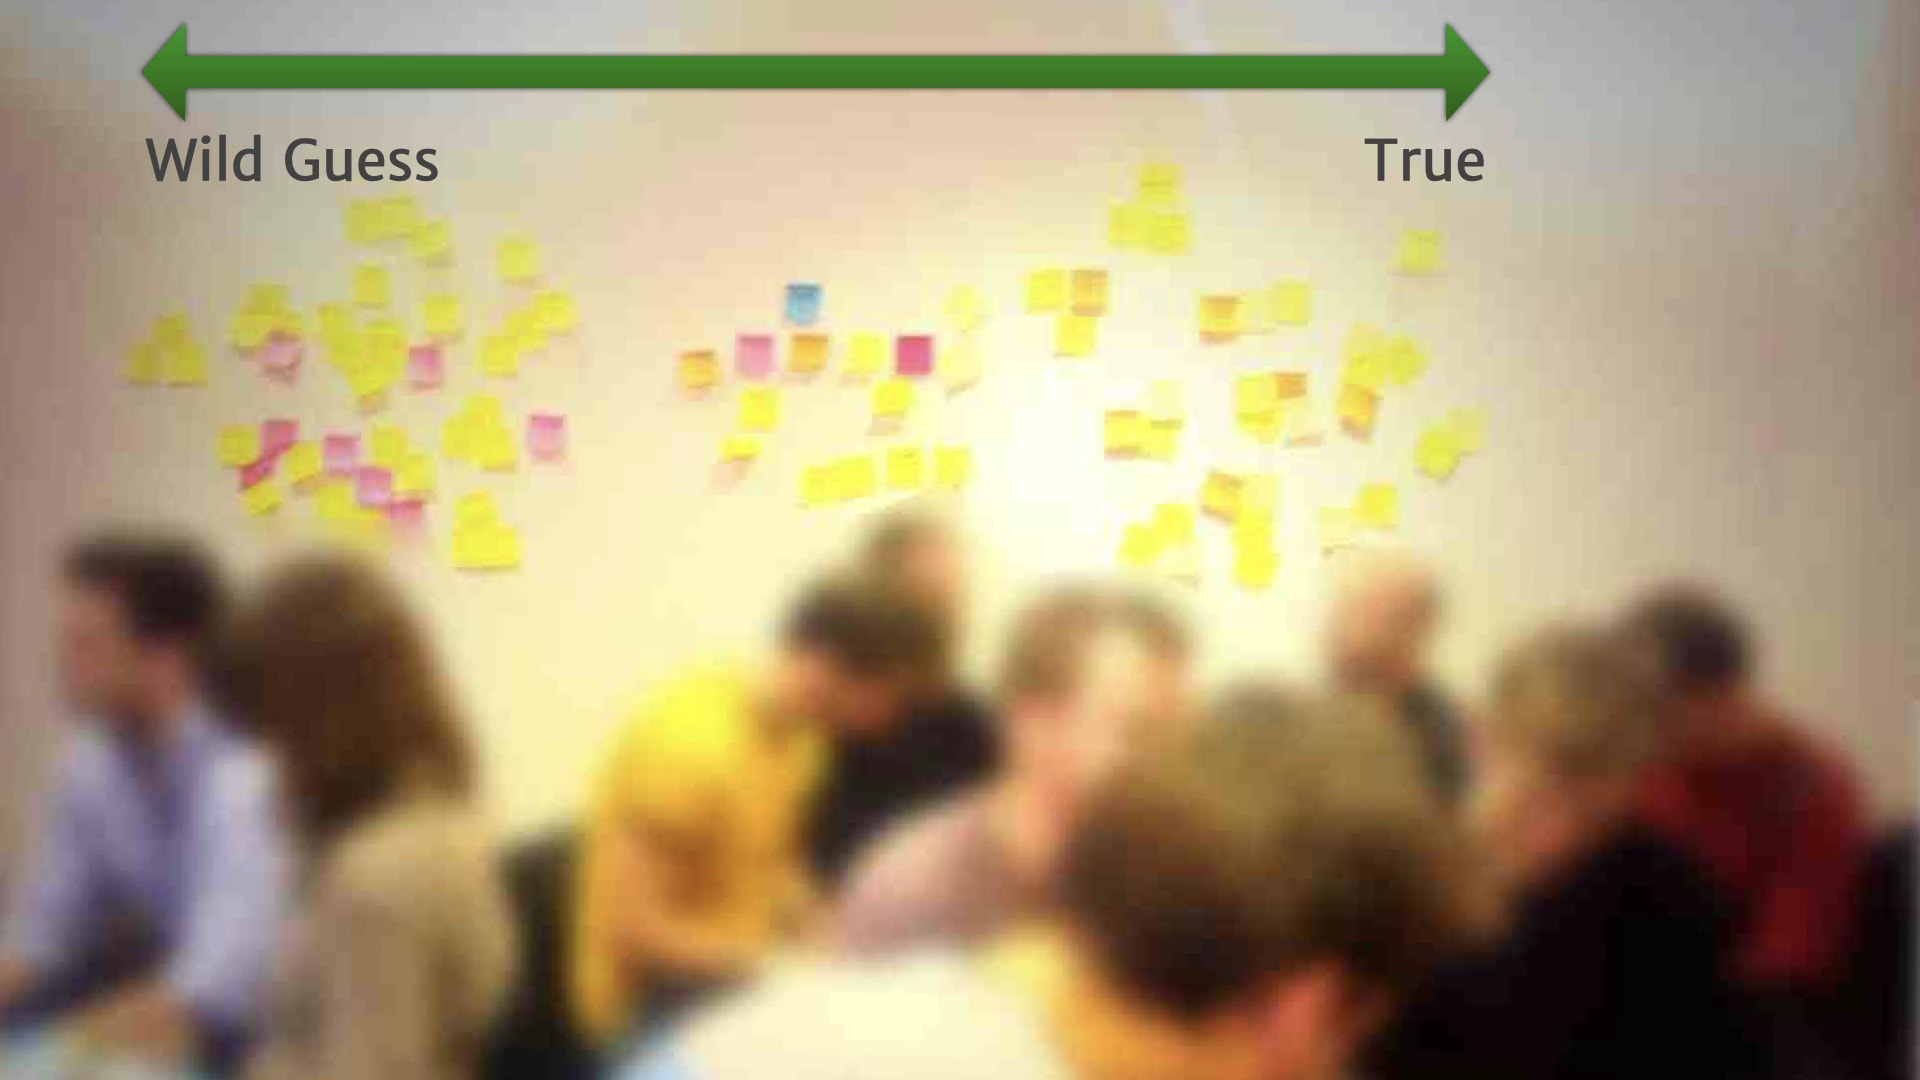 A photo of a group of people in front of a wall with lots of post-it notes on. The people have been blurred out. Above the post-it notes there is a scale that goes from 'Wild Guess' on the left to 'True' on the right.